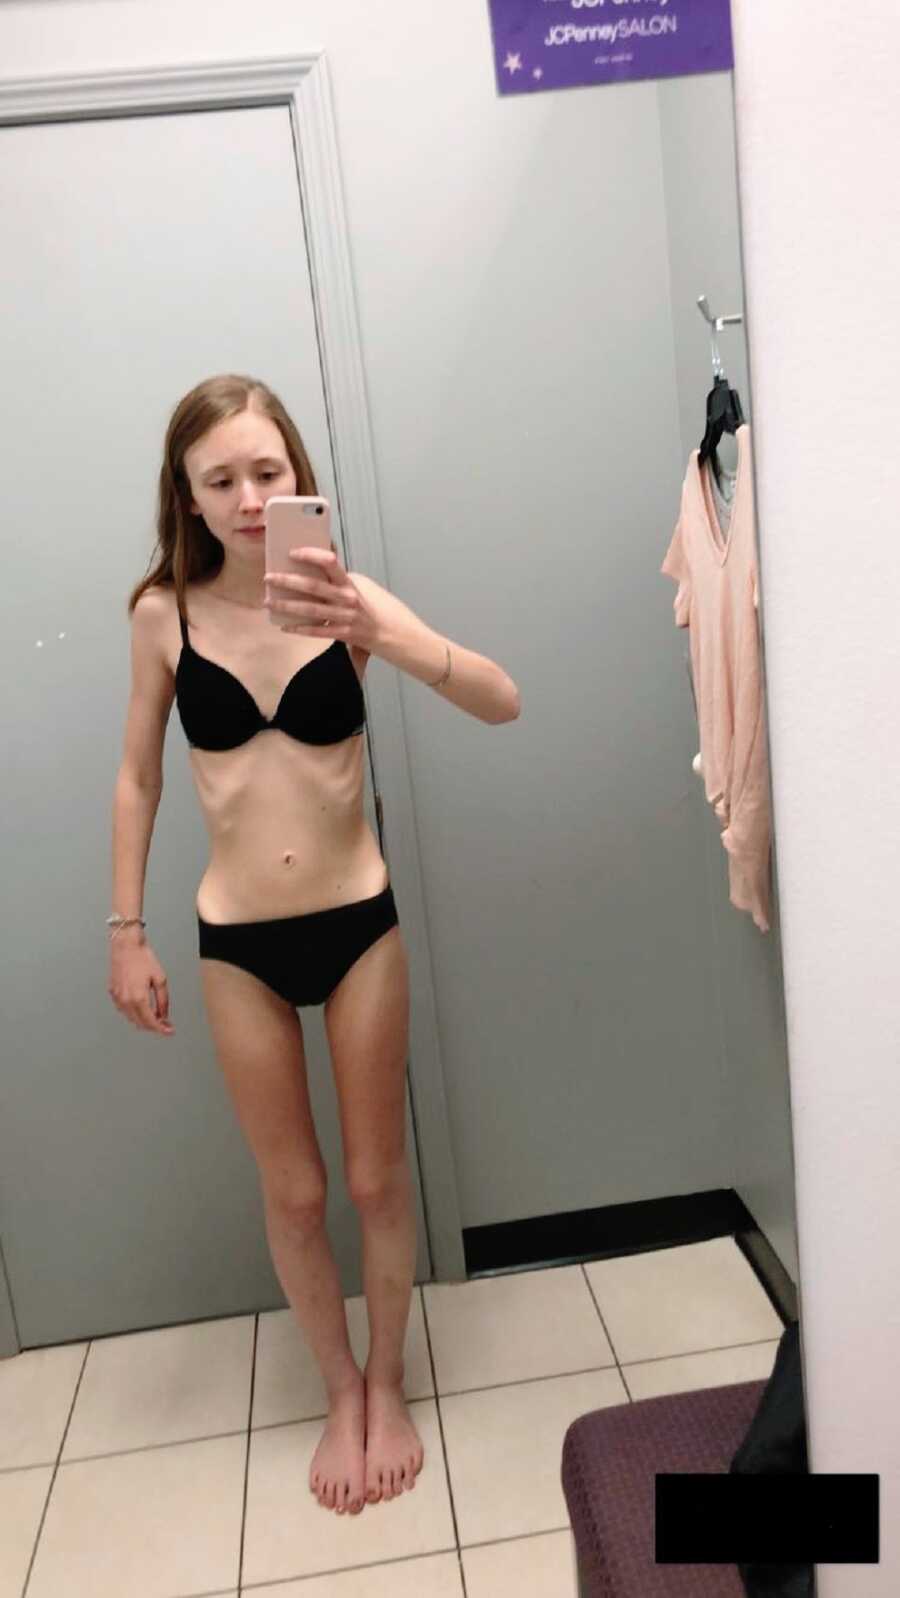 A young girl with an eating disorder wearing a bathing suit